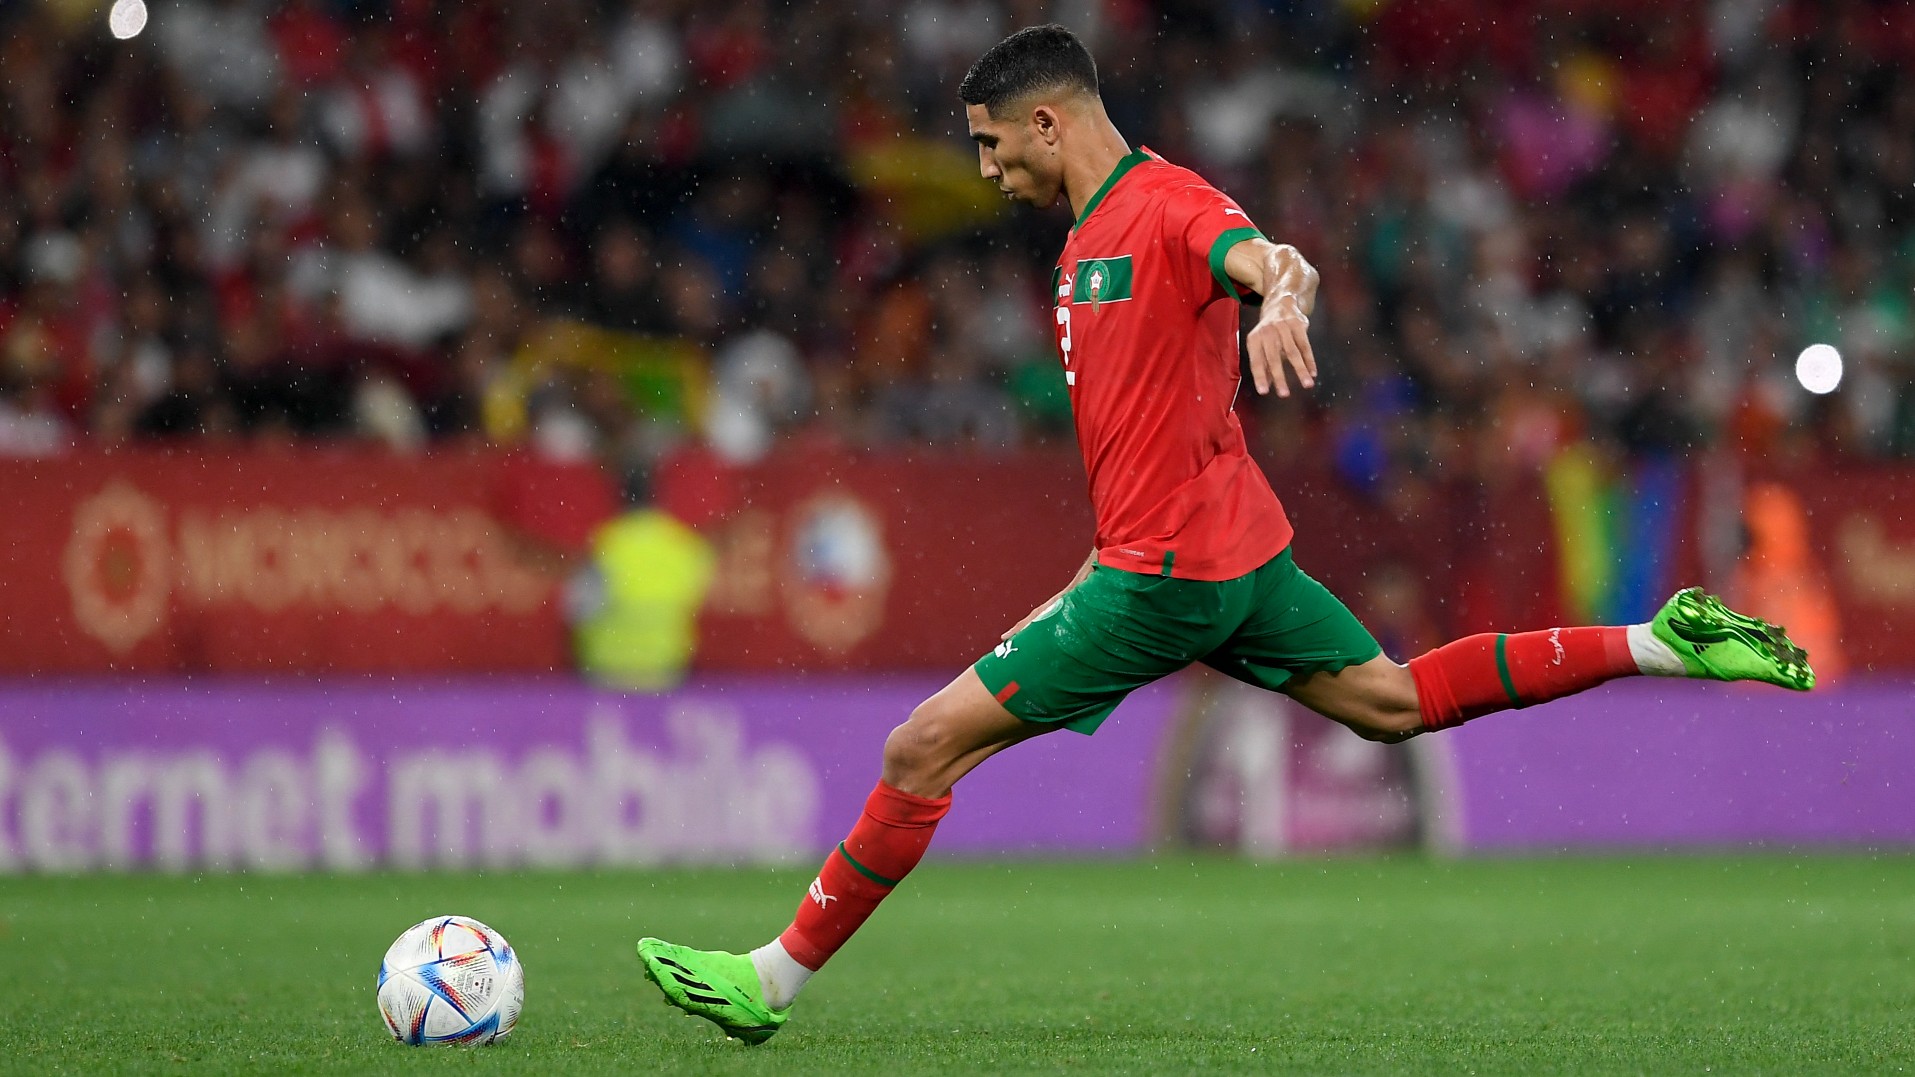 Morocco's Achraf Hakimi controls the ball during an international friendly with Chile at the Cornella-El Prat stadium in Cornella de Llobregat, Spain, on 23 September, 2022 (AFP)